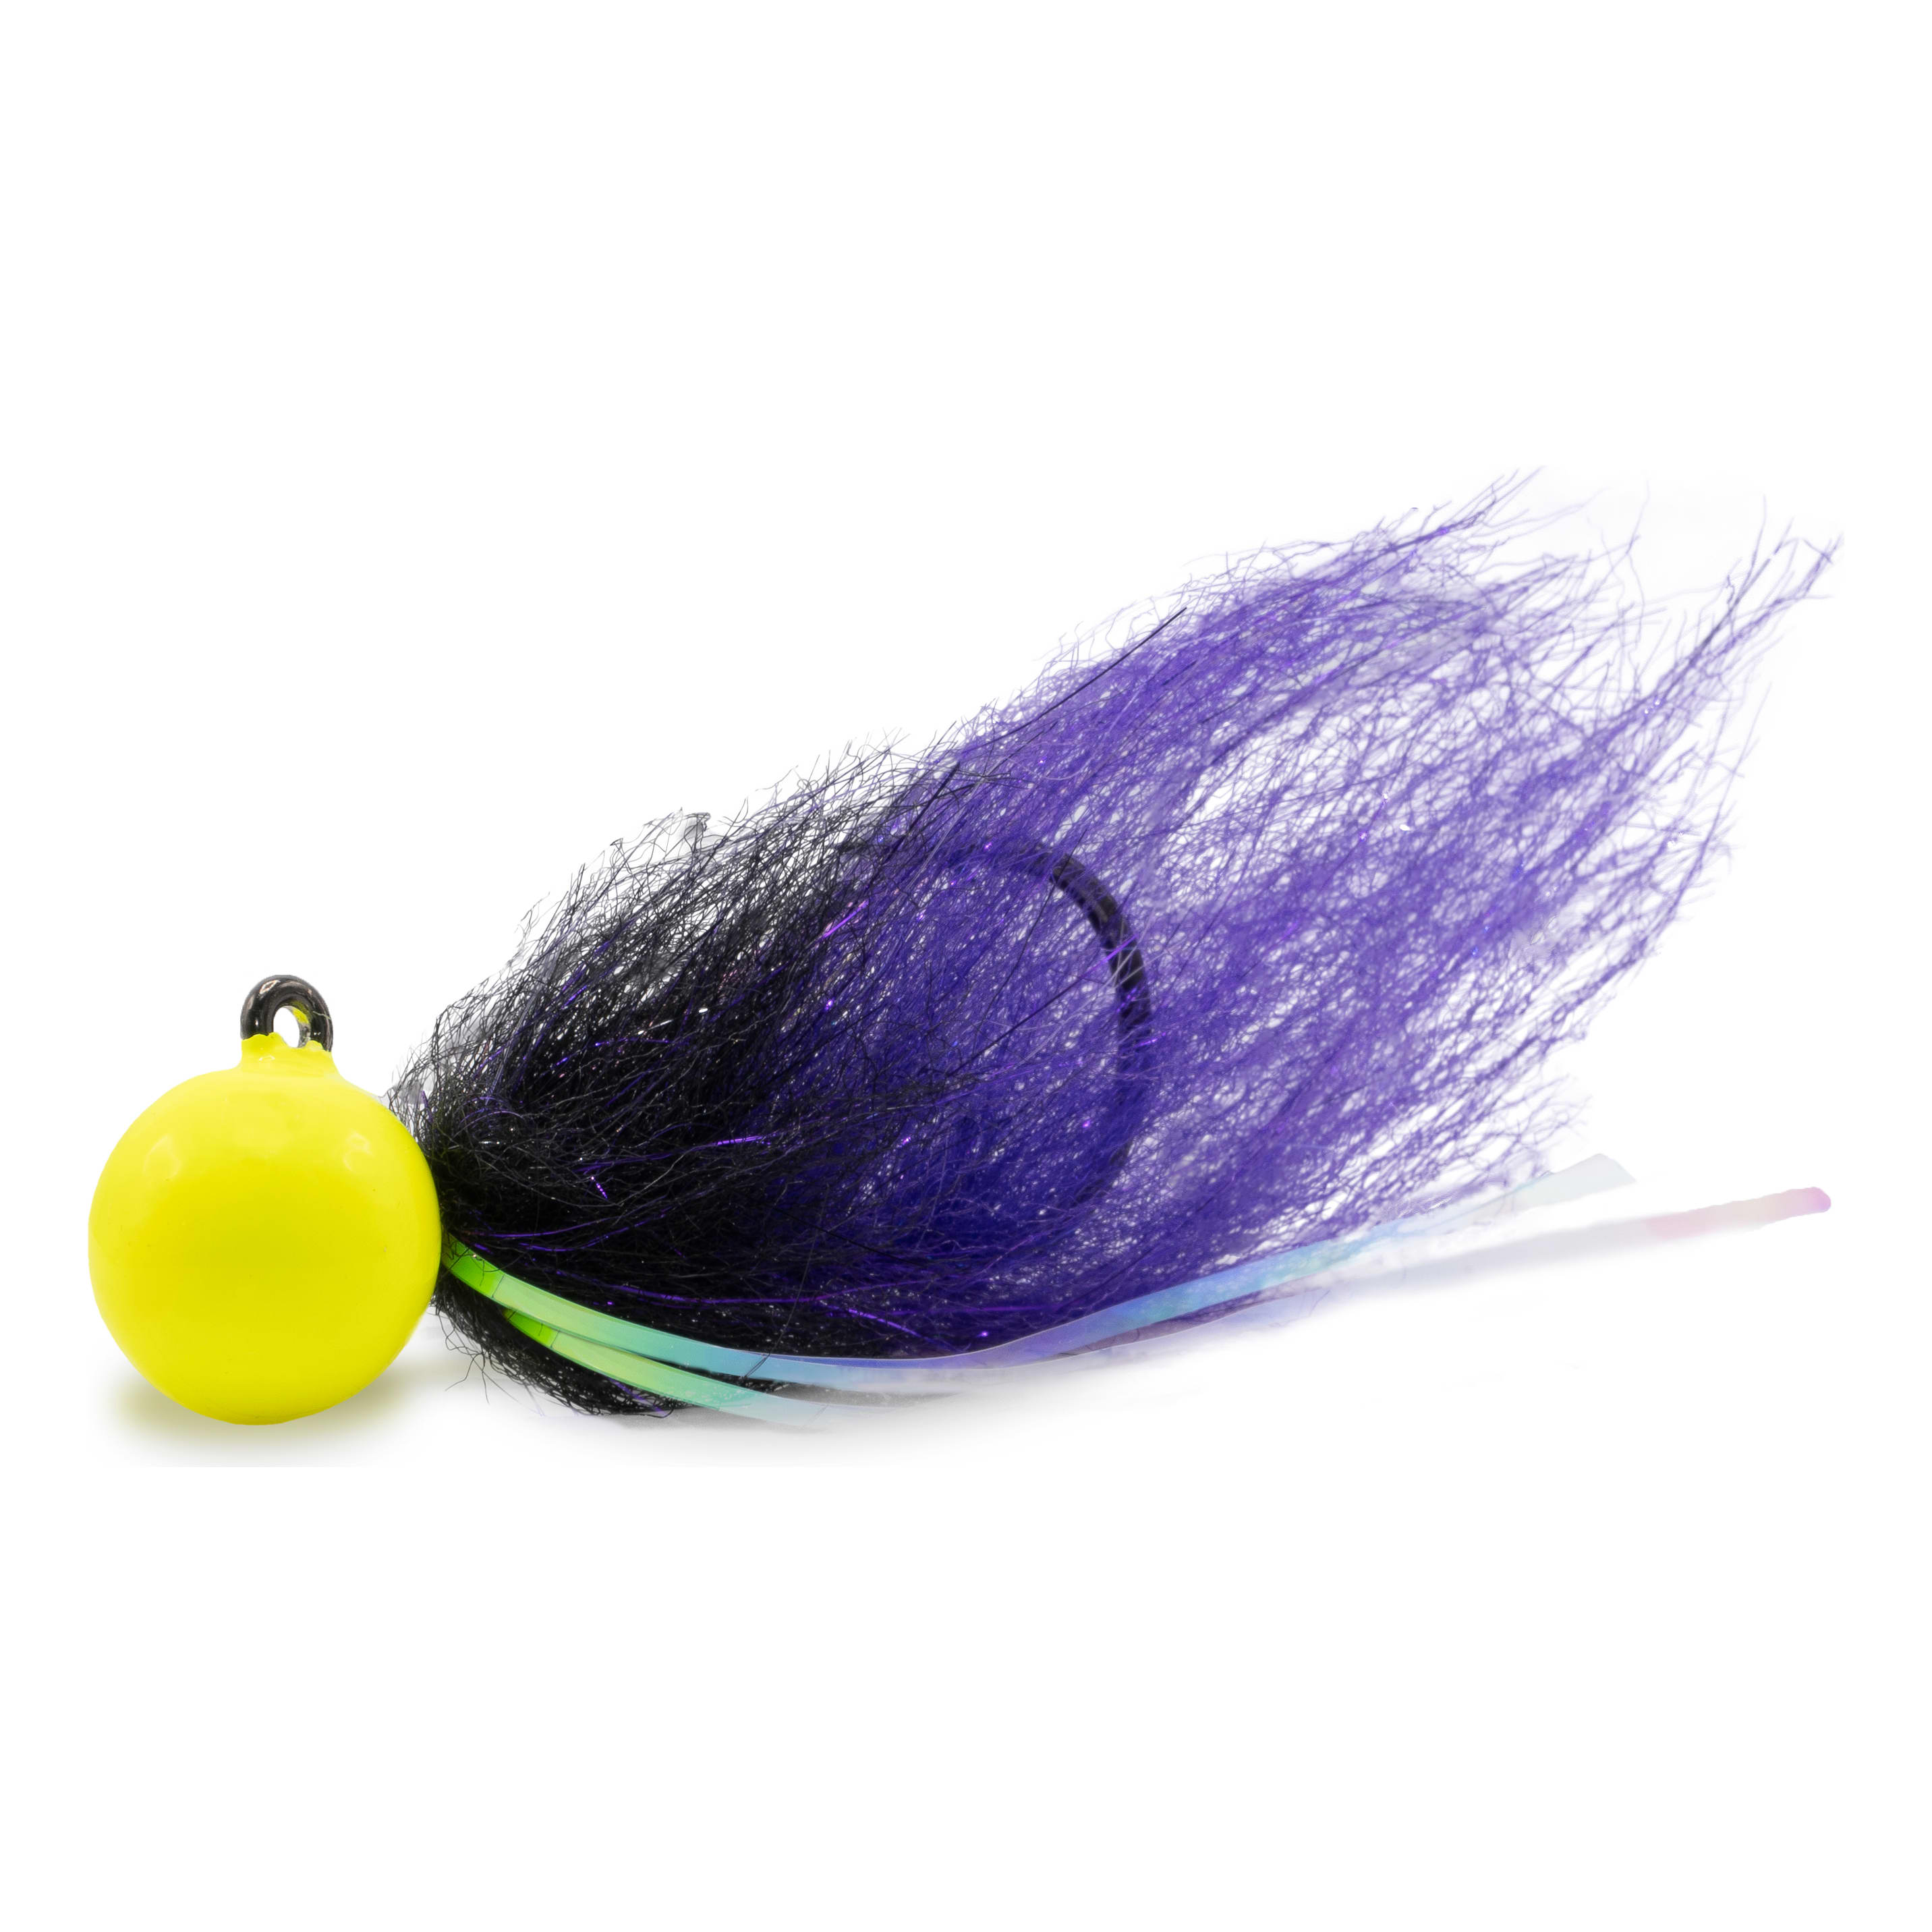 Mustad® Addicted Tailout Twitcher Jig - Chartreuse Black Purple,Mustad® Addicted Tailout Twitcher Jig - Chartreuse Black Purple